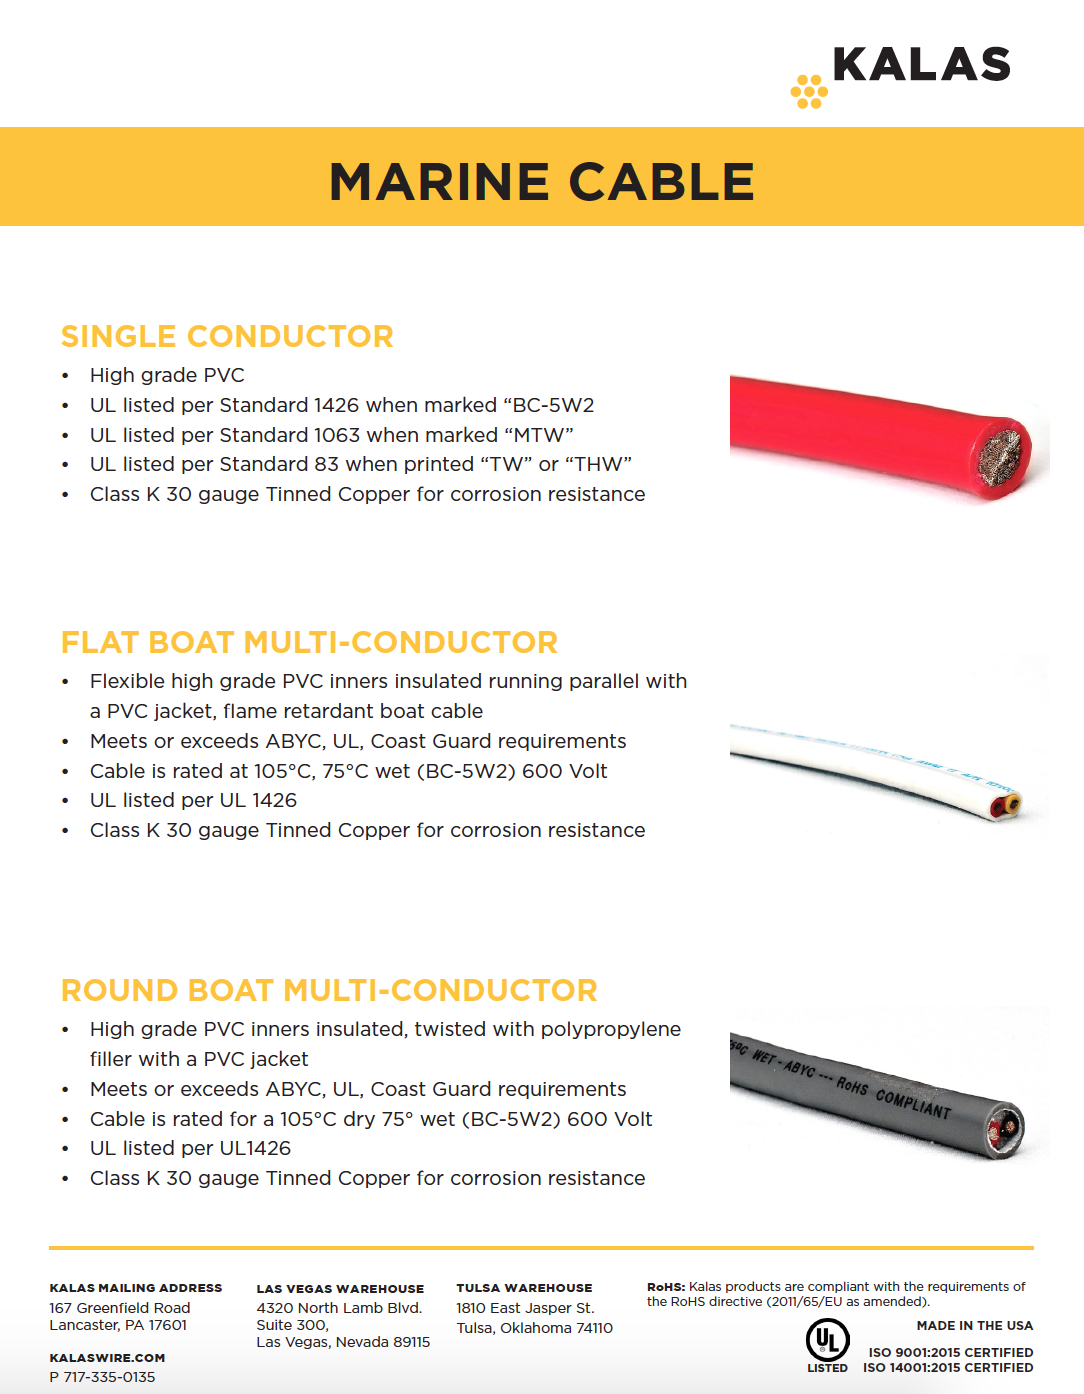 Marine and Recreation Cable and Wire for RVs, Hovercrafts, Boats and more